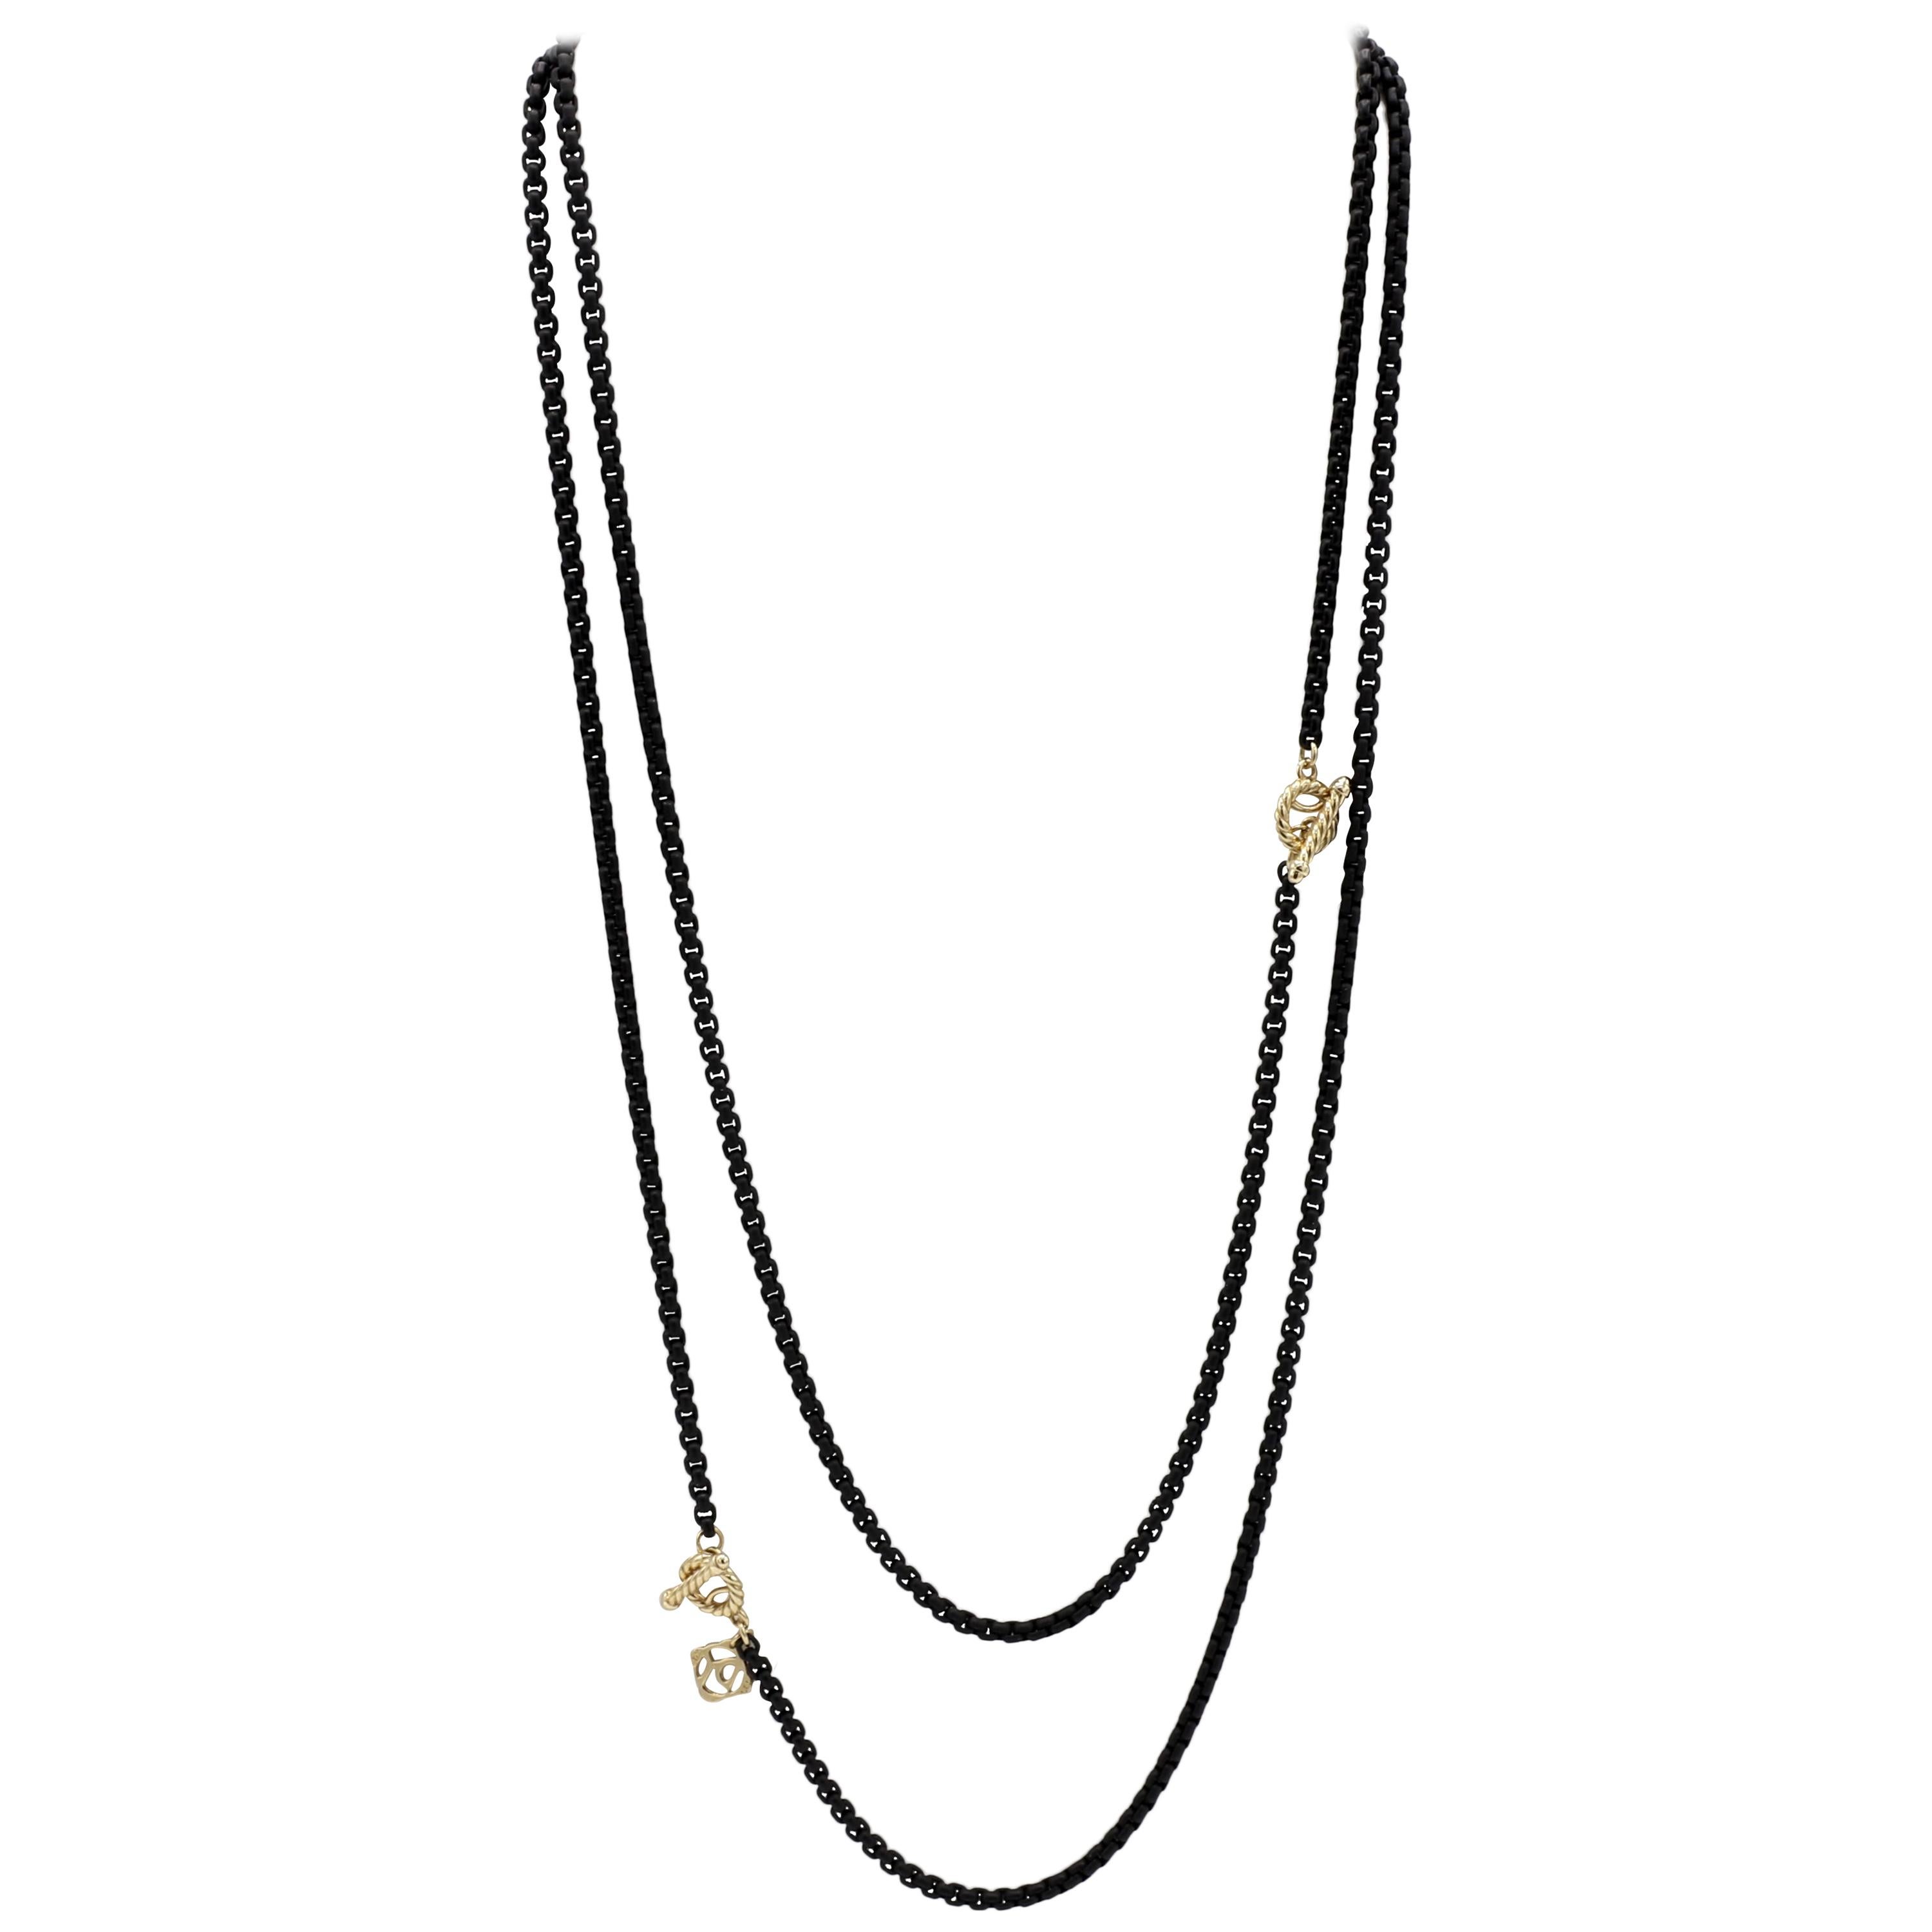 David Yurman Bel Aire Black Acrylic Chain Necklace with 14 Karat Gold Accents